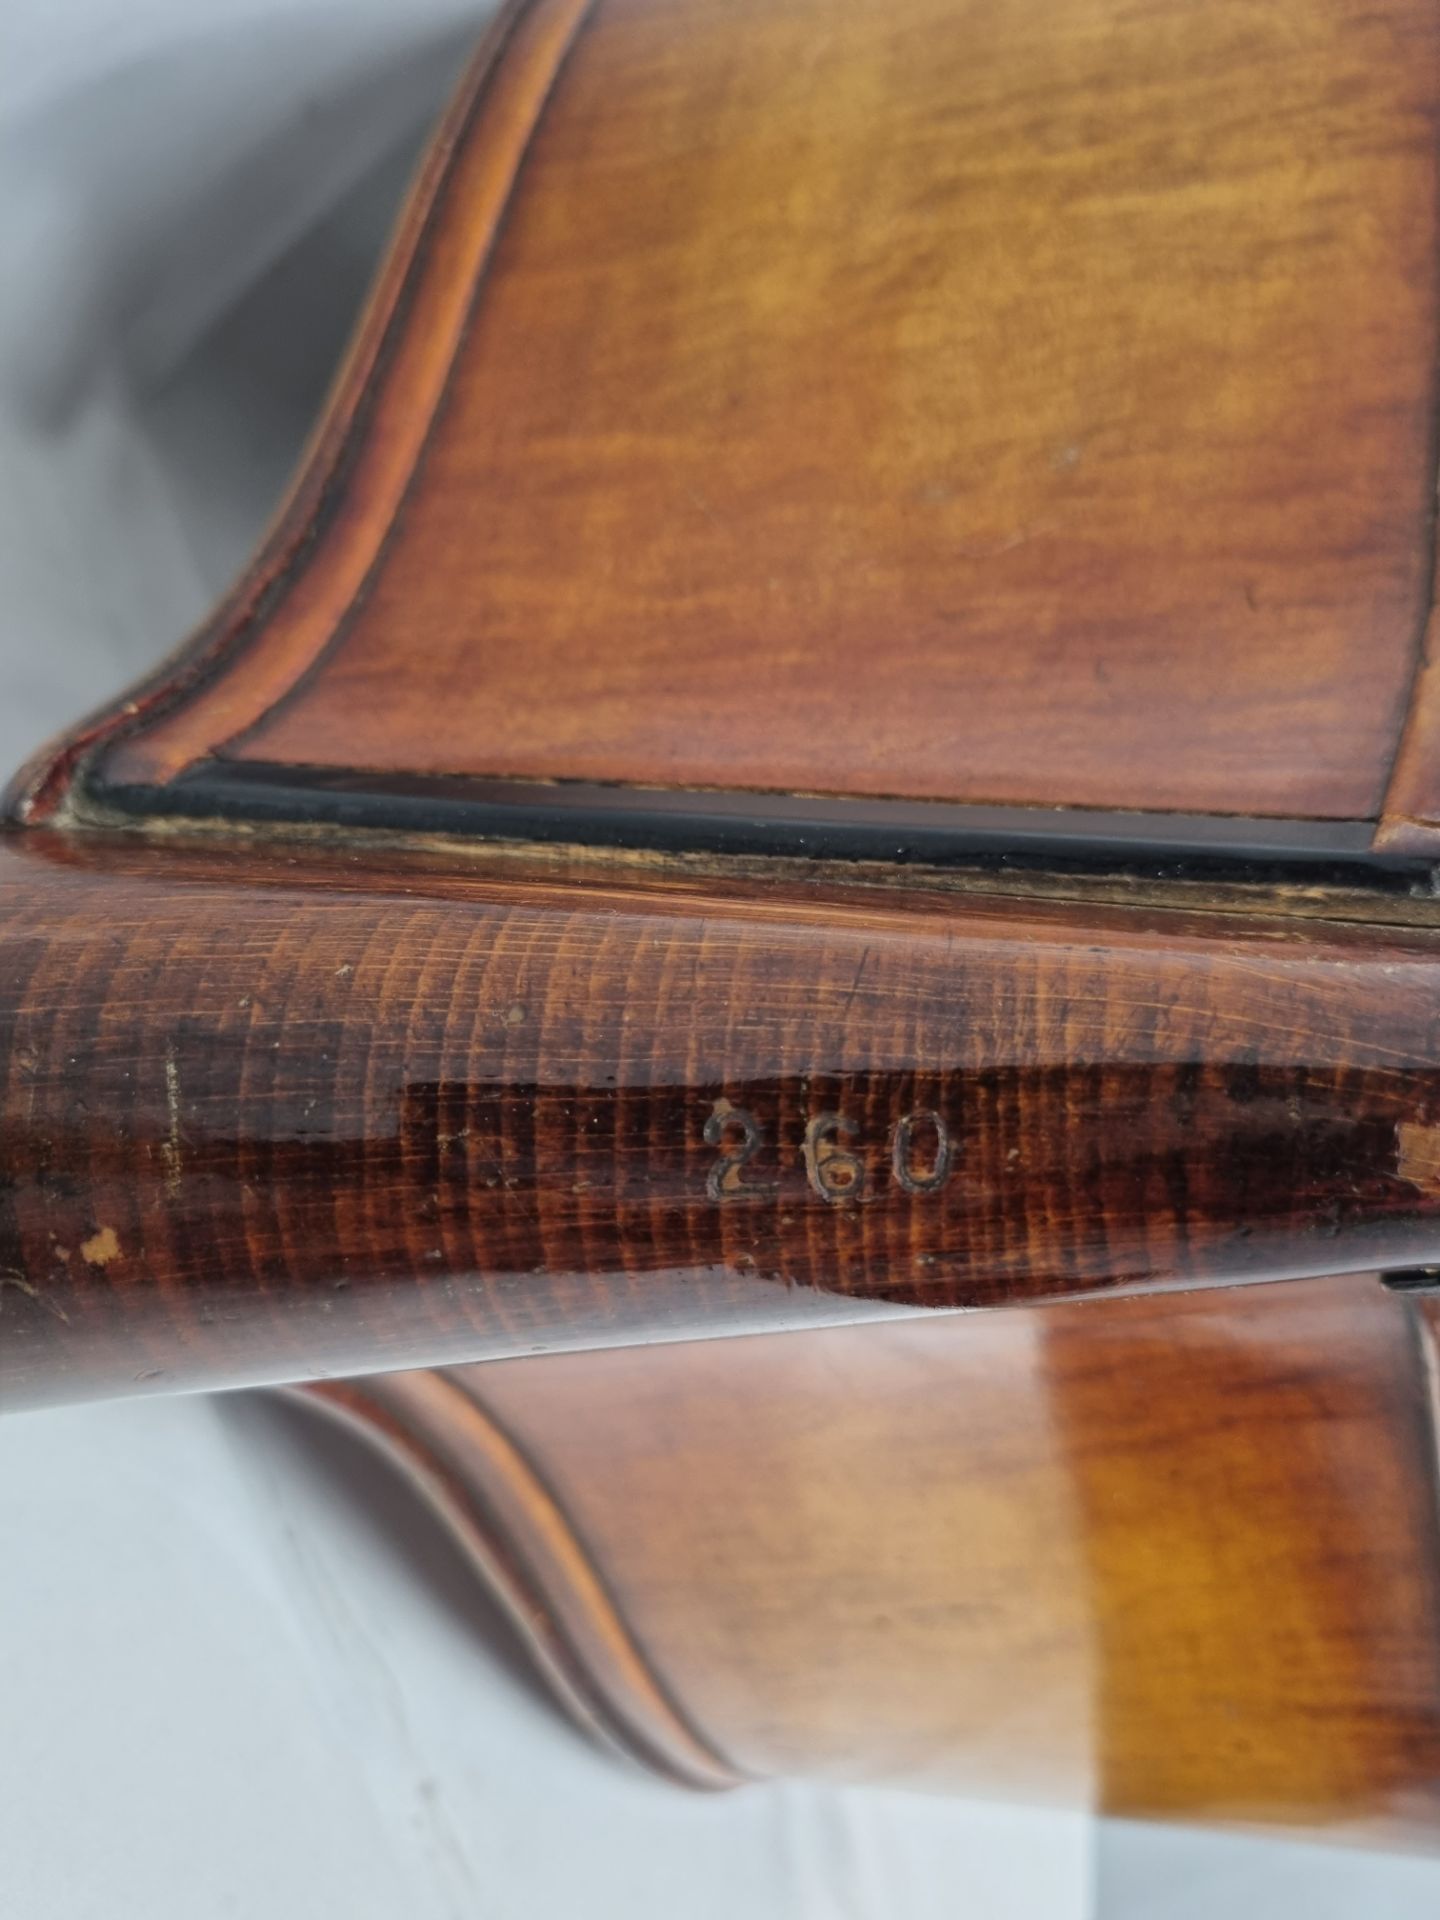 Boosey and Hawkes Excelsior Double Bass in Bag - Image 26 of 27